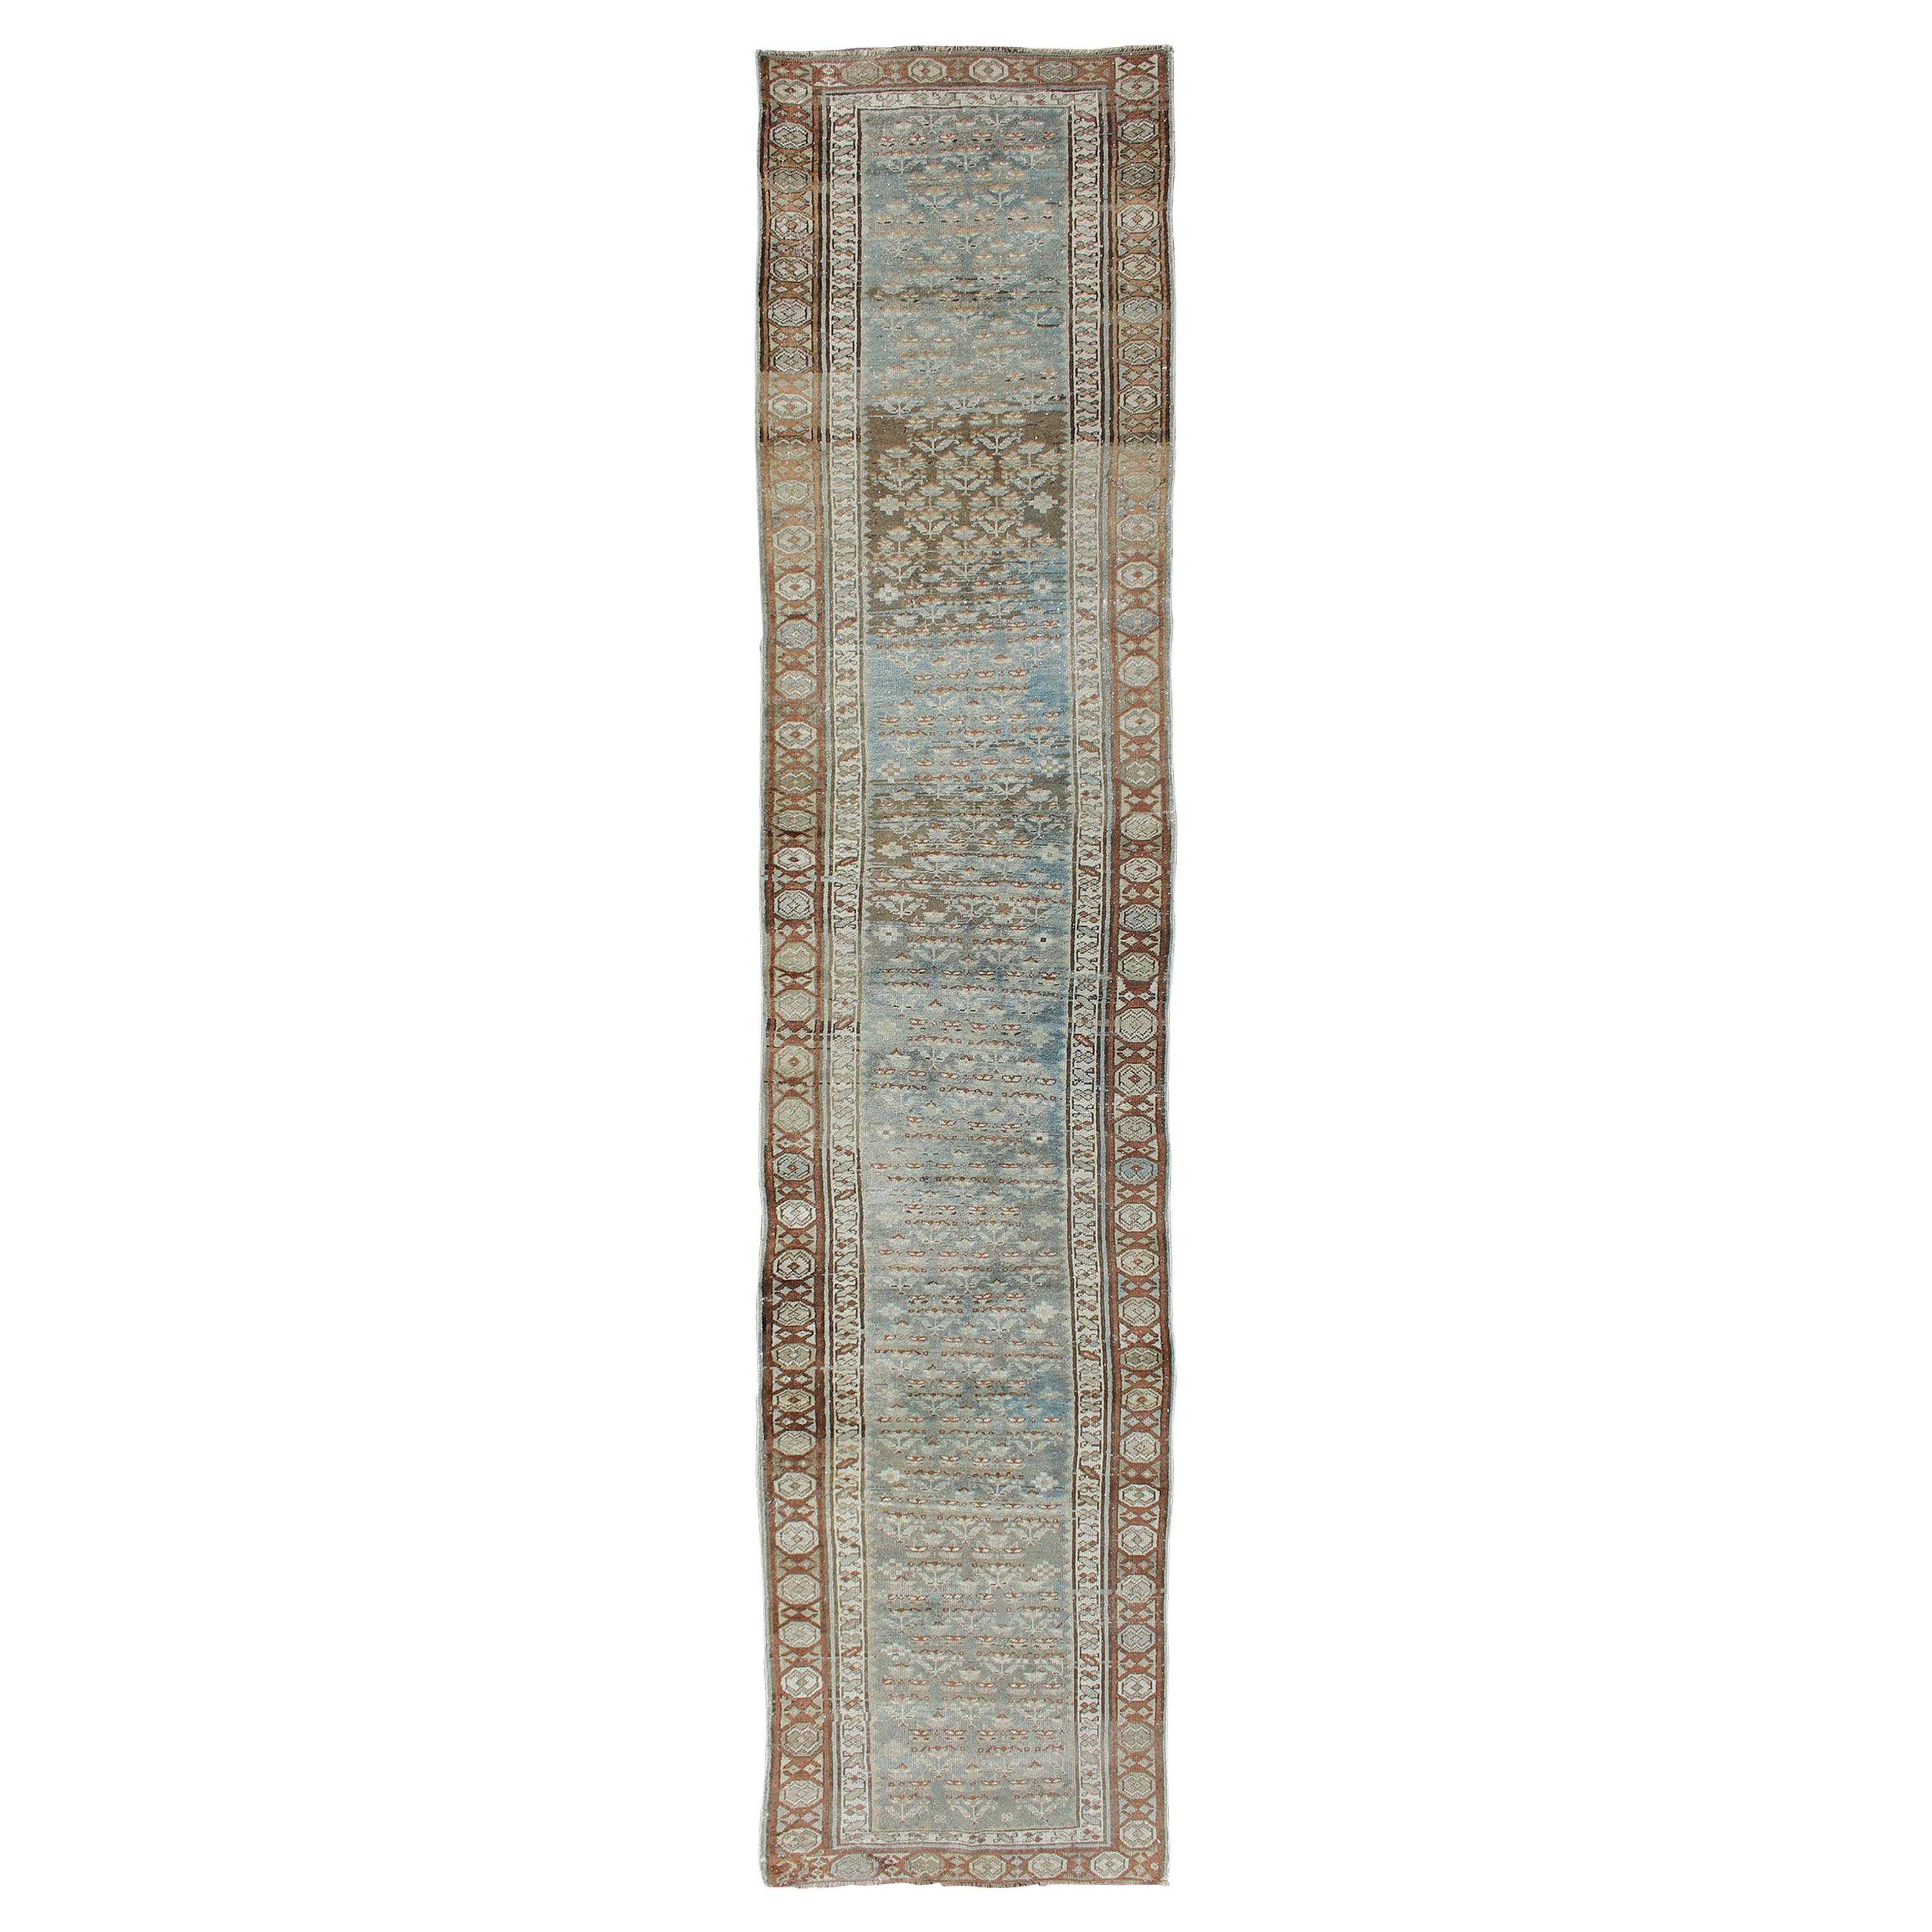 Antique Persian Malayer Runner in Gray, Blue, and Red with All-Over Design